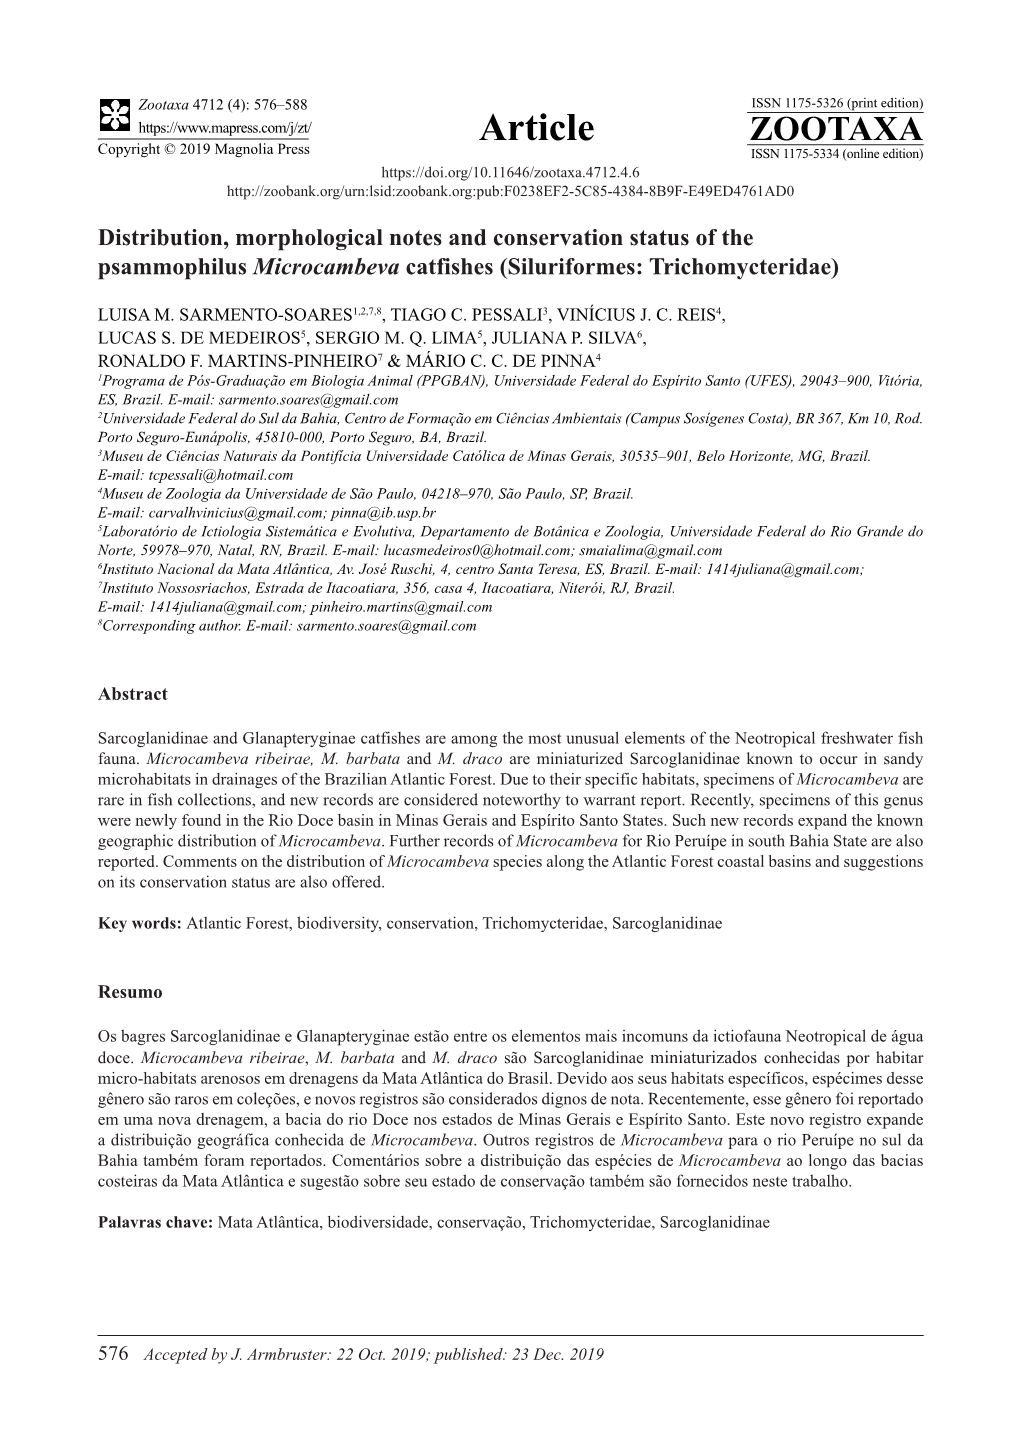 Distribution, Morphological Notes and Conservation Status of the Psammophilus Microcambeva Catfishes (Siluriformes: Trichomycteridae)